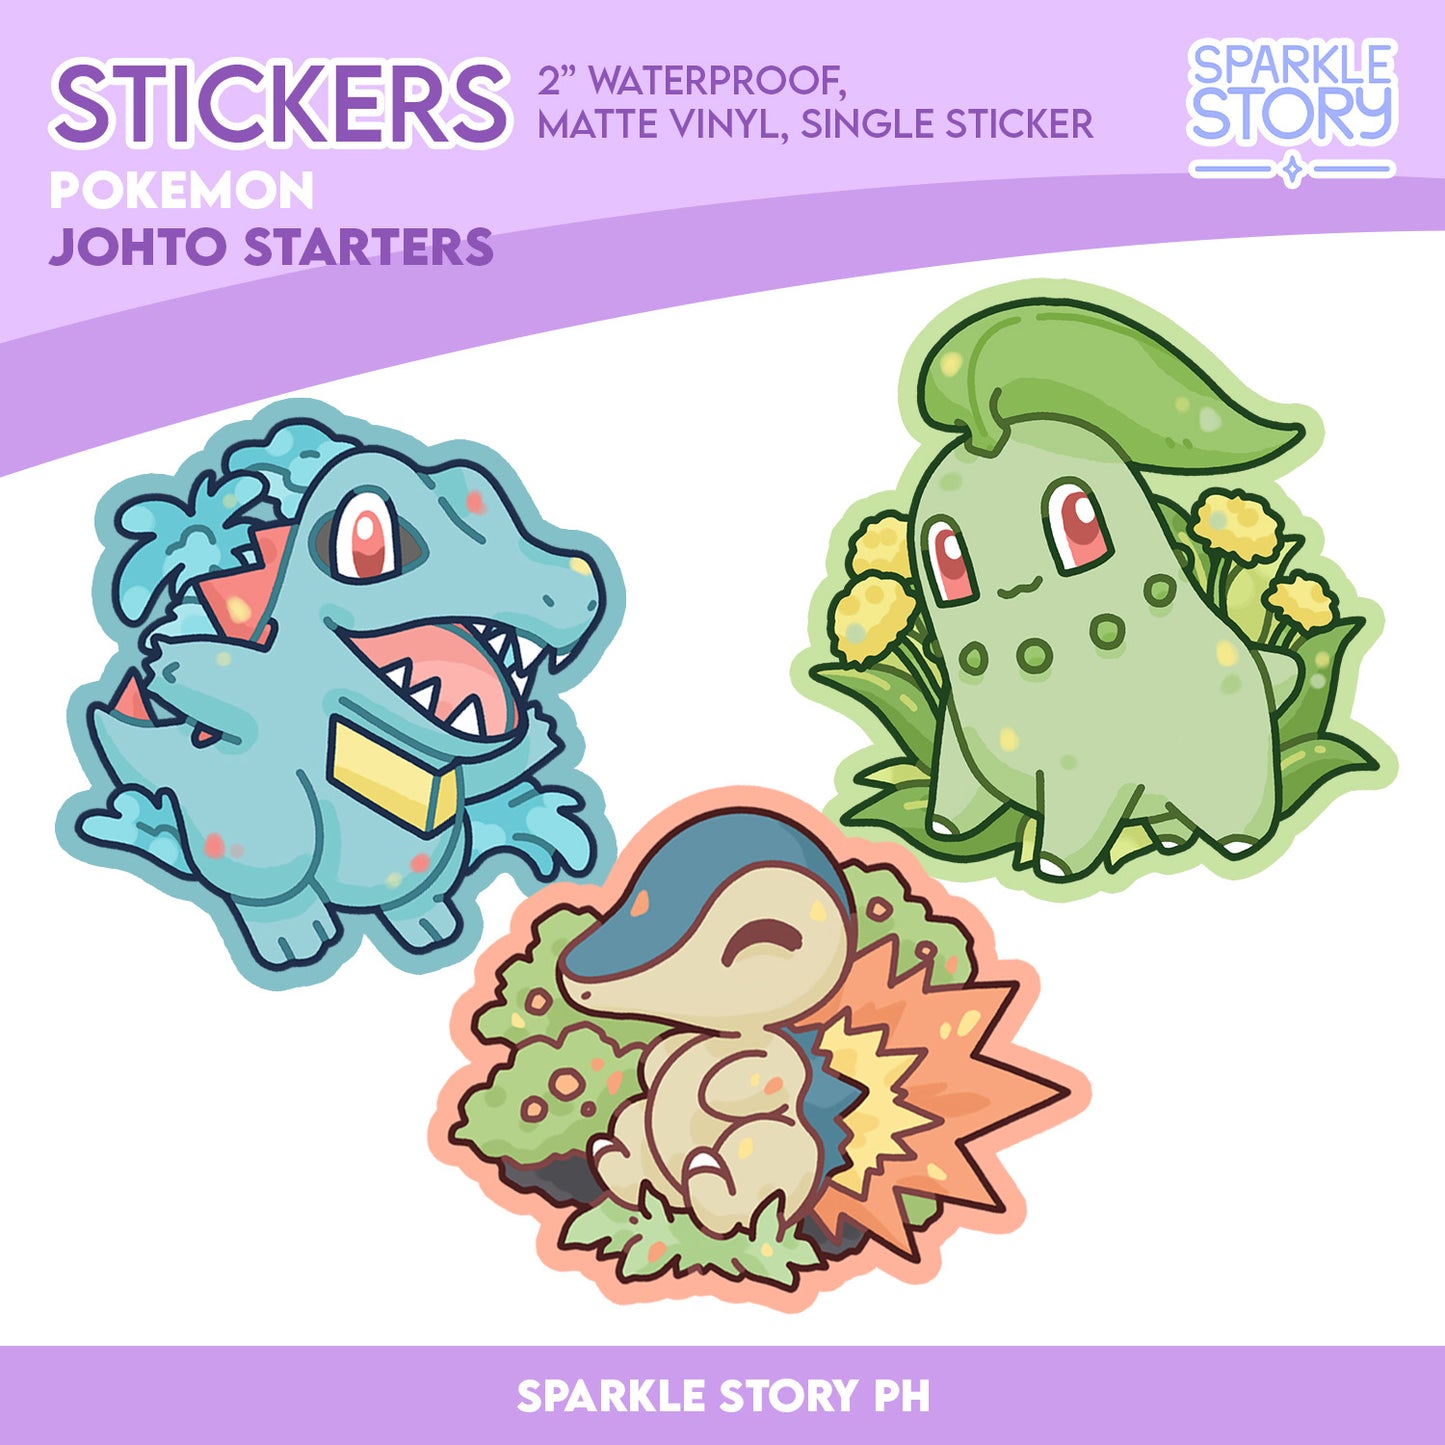 Silver Gold Johto Starters - Stickers